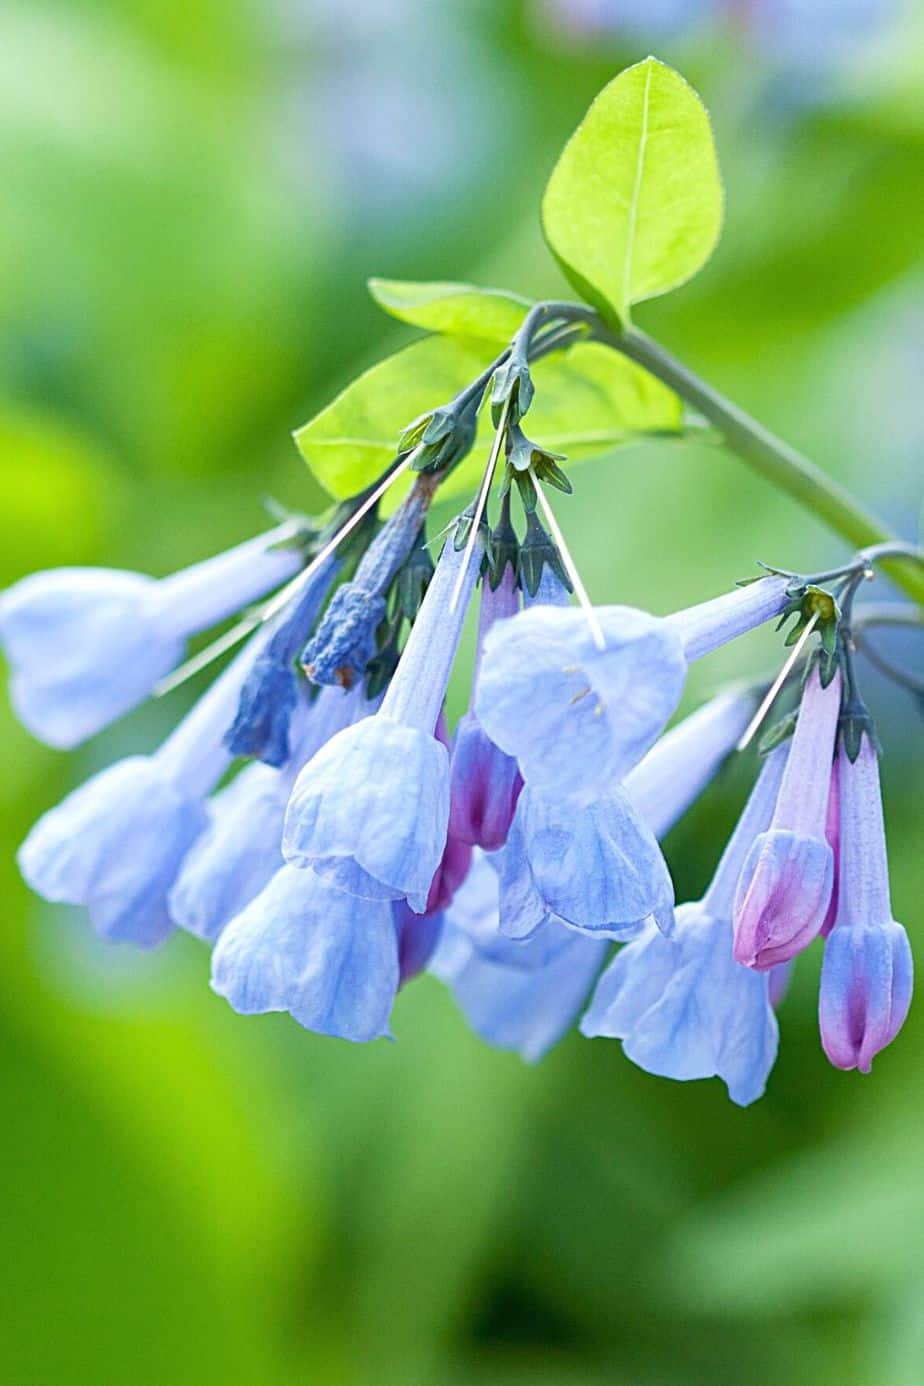 Virginia Bluebells attracts bees and butterflies when planted on the east-facing side of the house